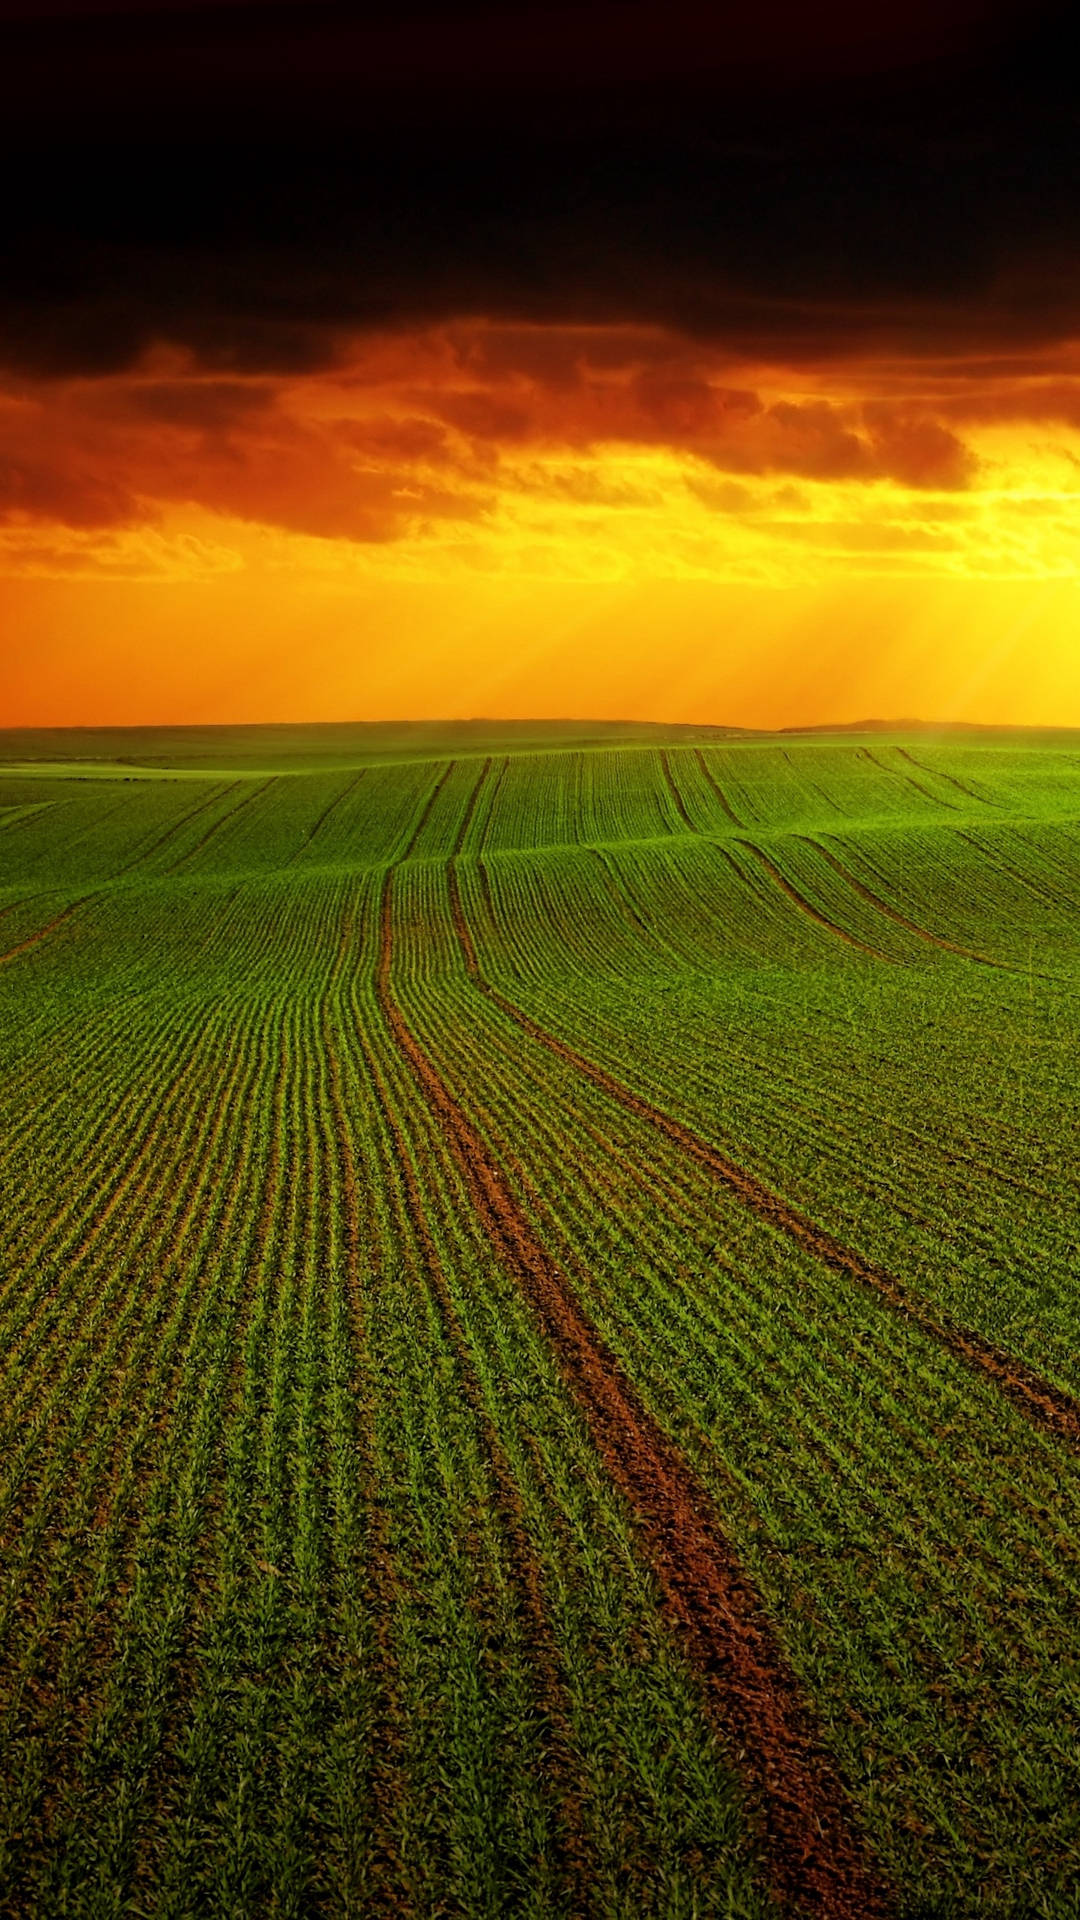 Agriculture Landscape And Sunset Wallpaper